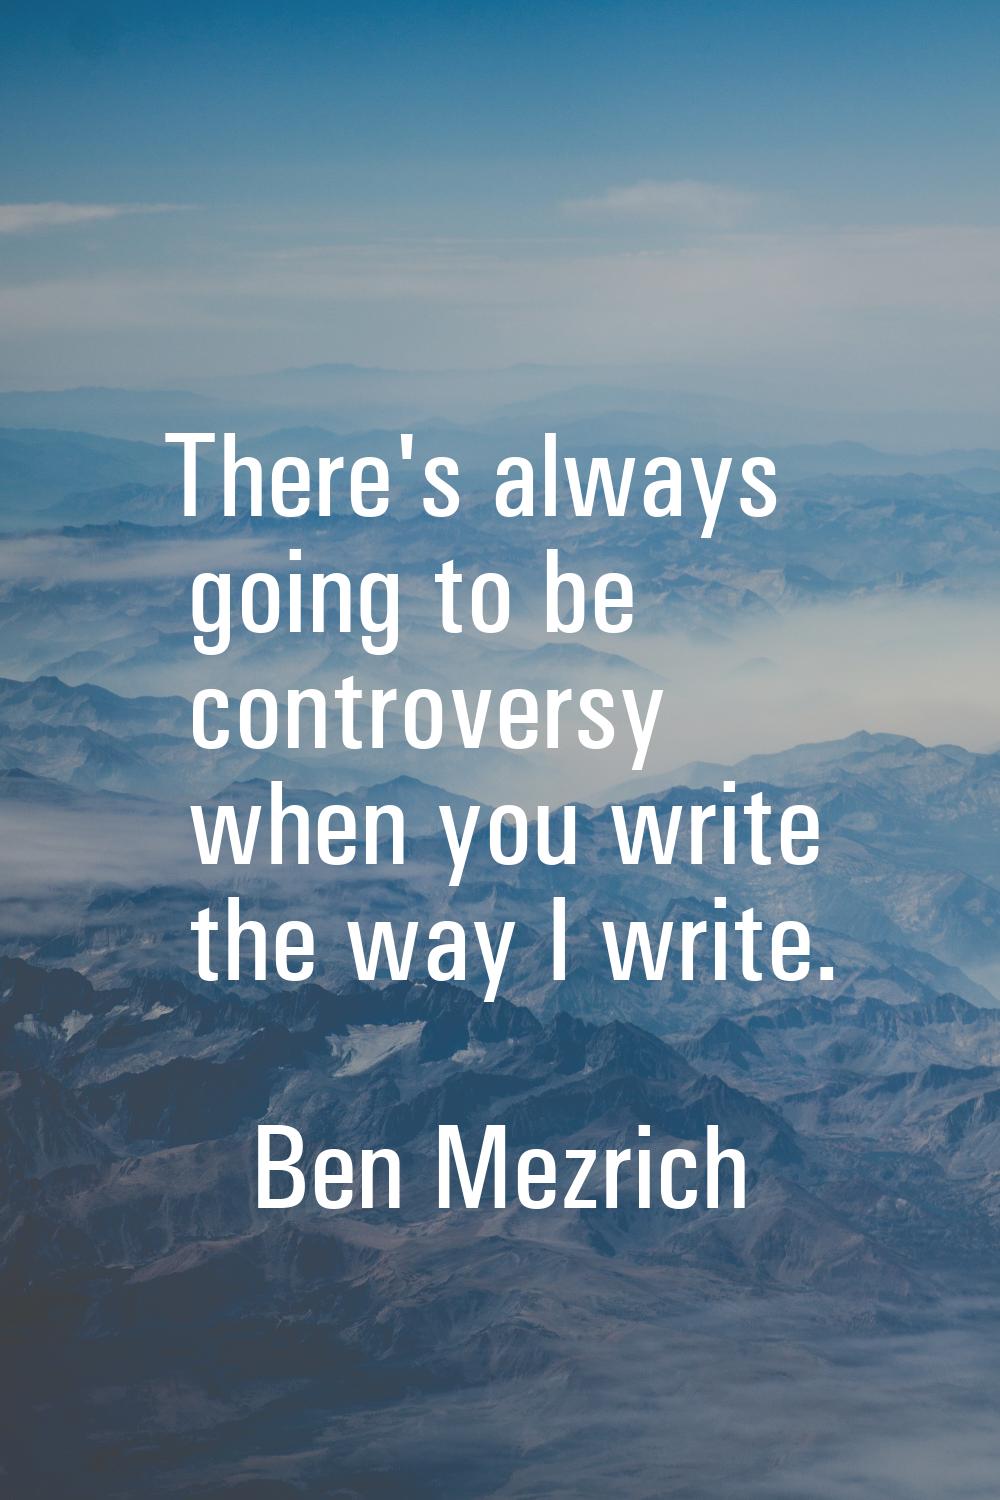 There's always going to be controversy when you write the way I write.